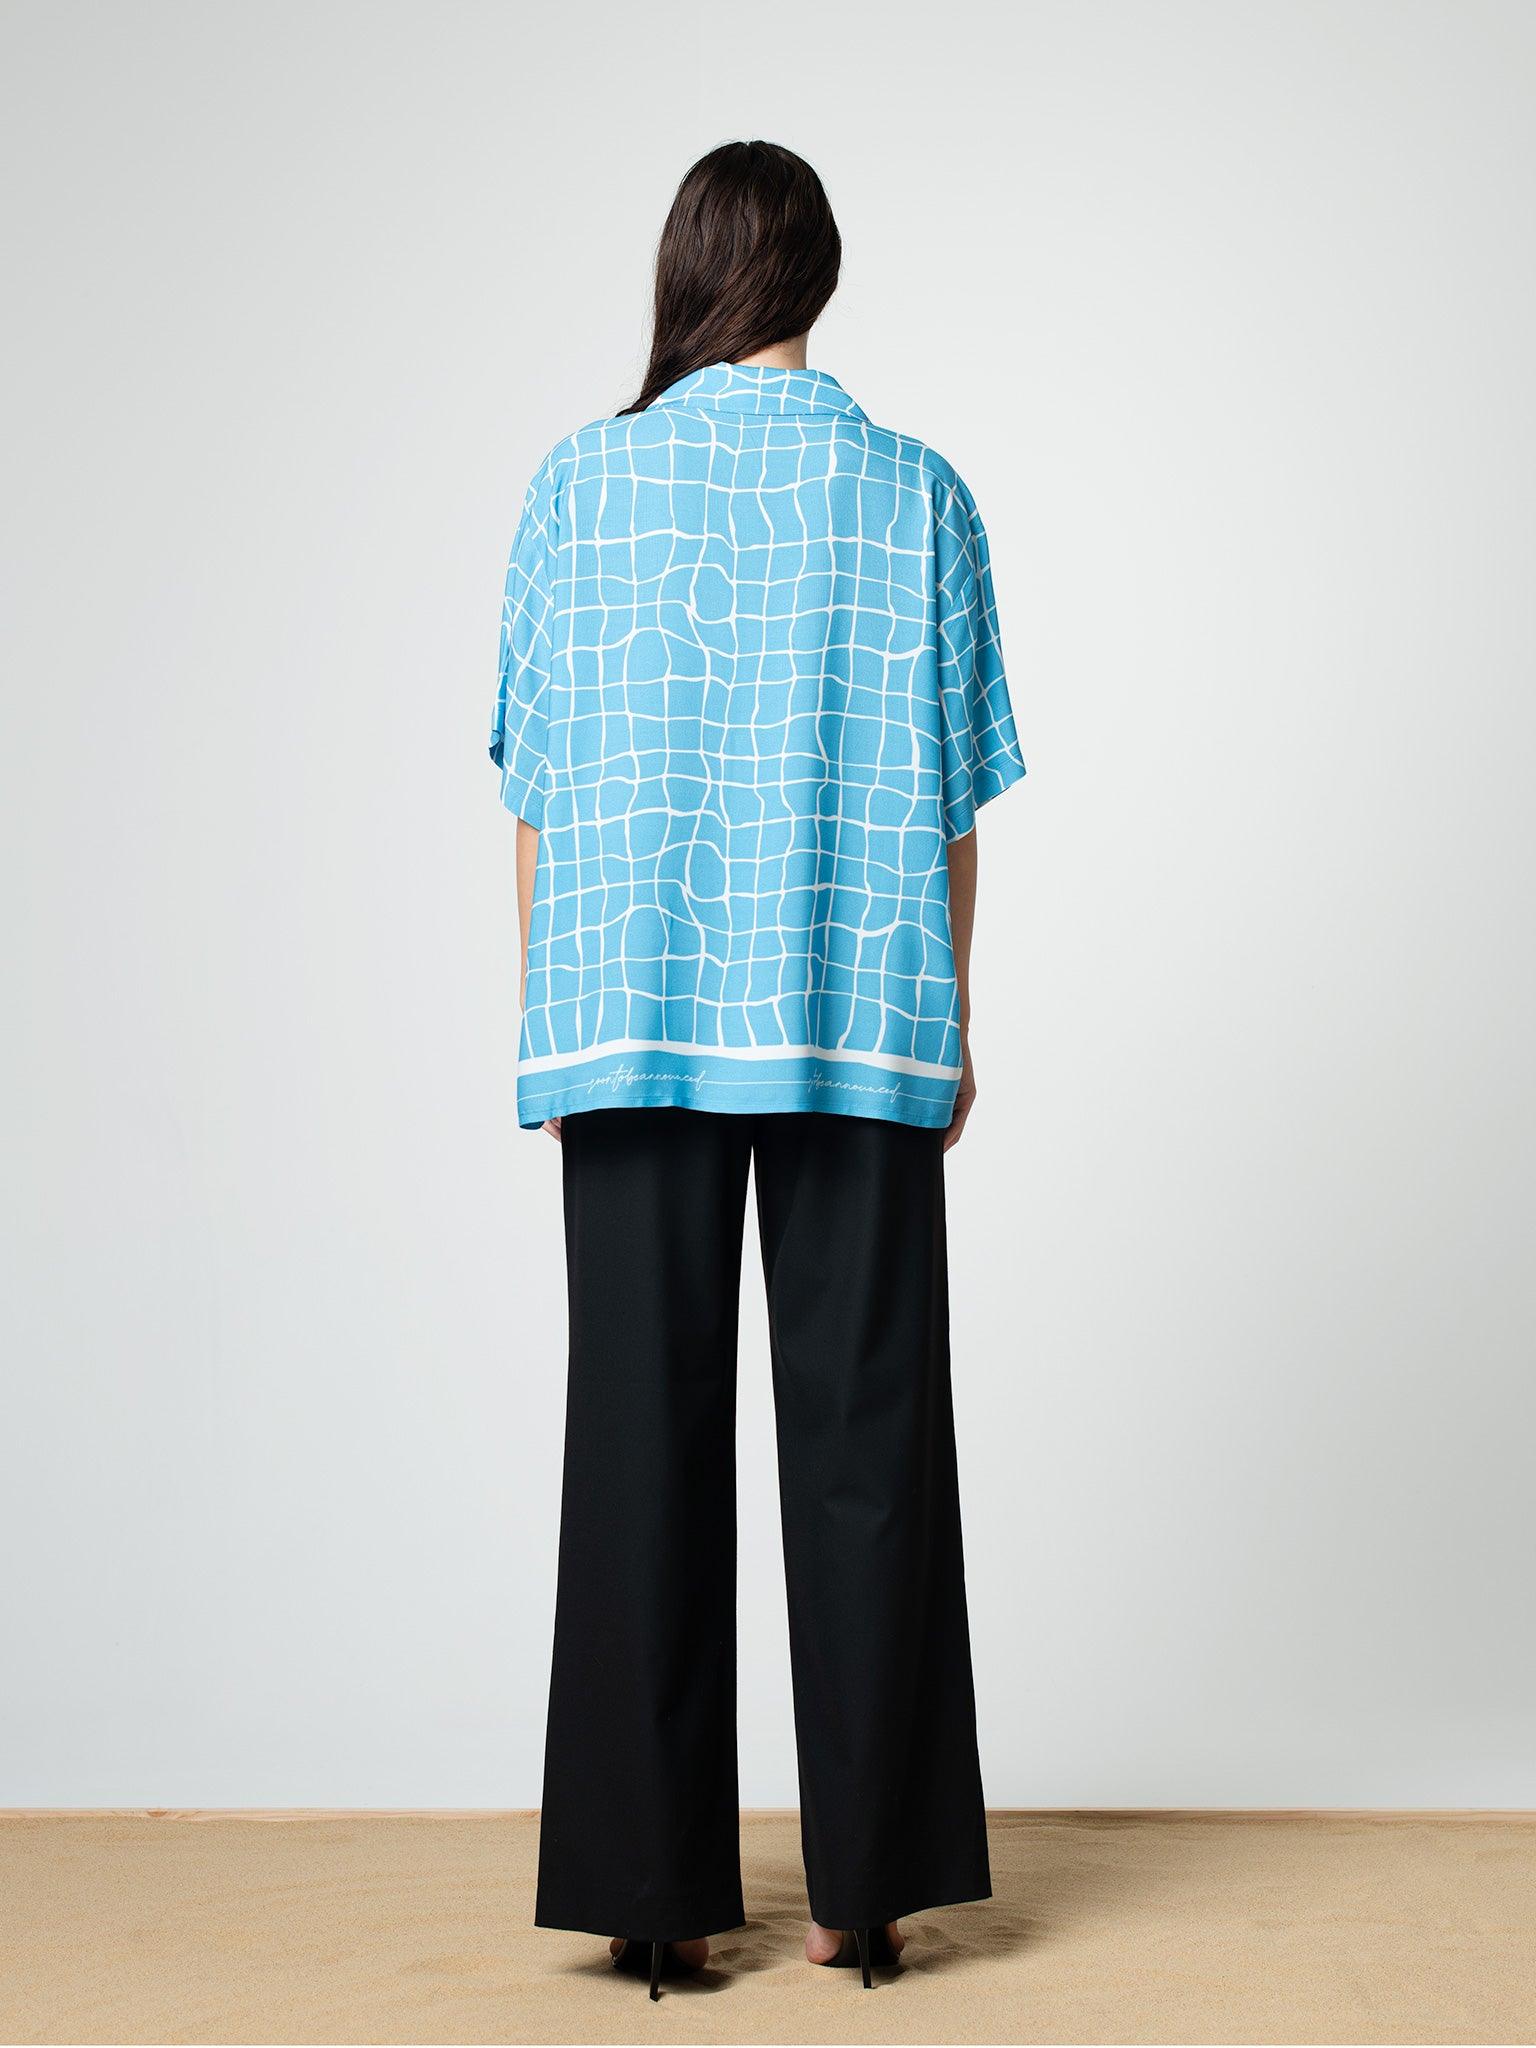 Pool Tile Bowling Shirt - SOON TO BE ANNOUNCED